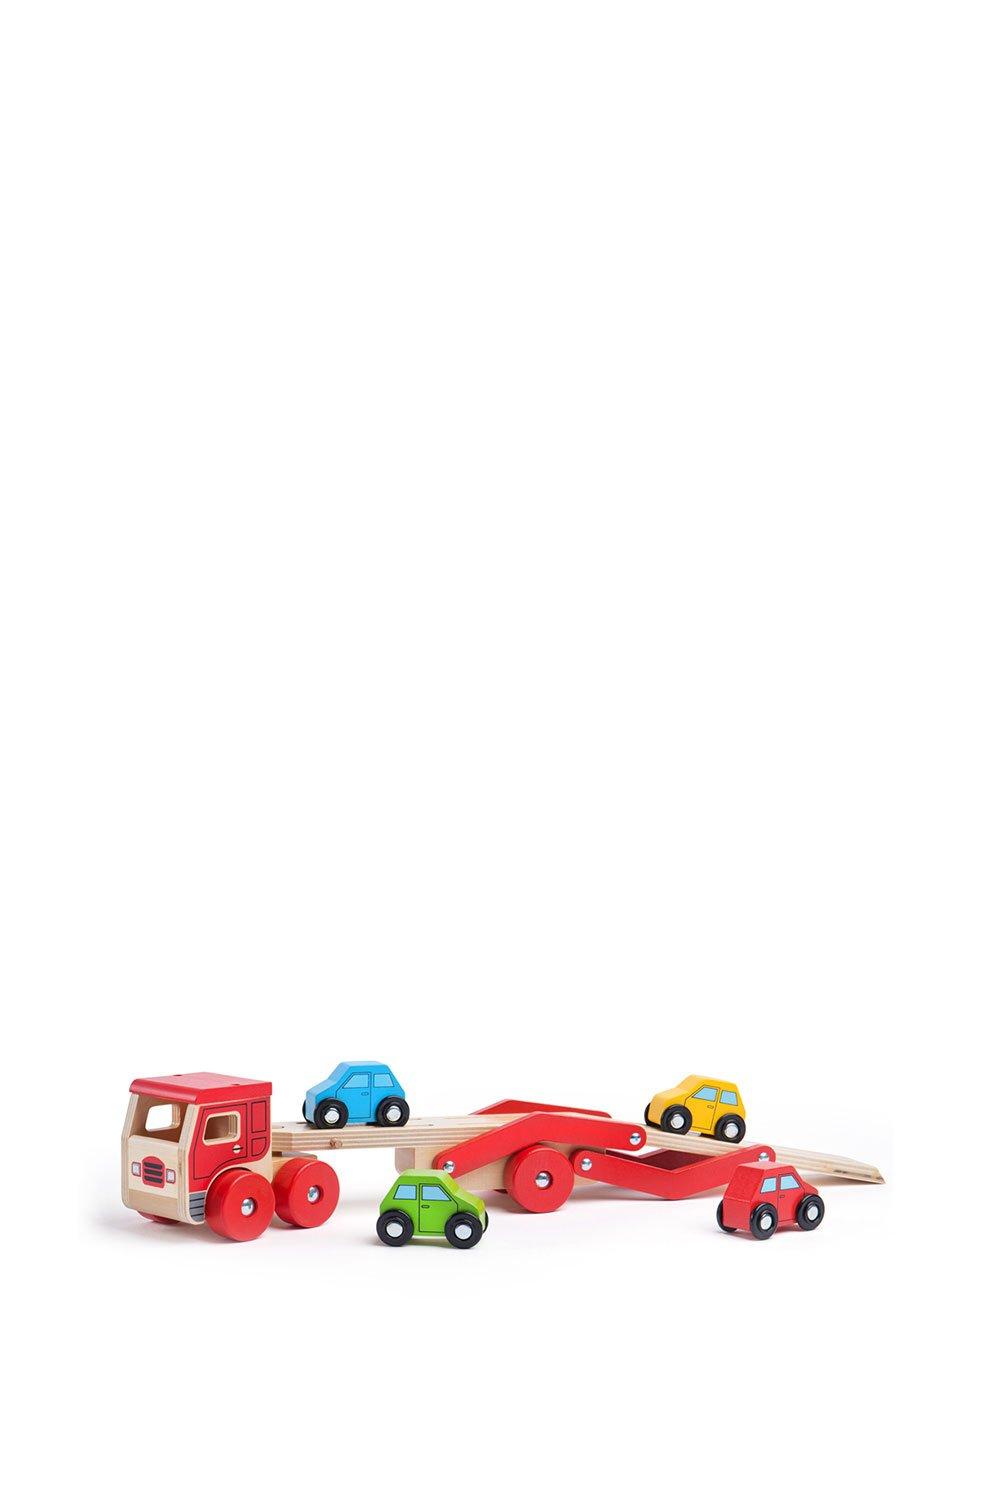 Bigjigs Toys Transporter Lorry Toy|red